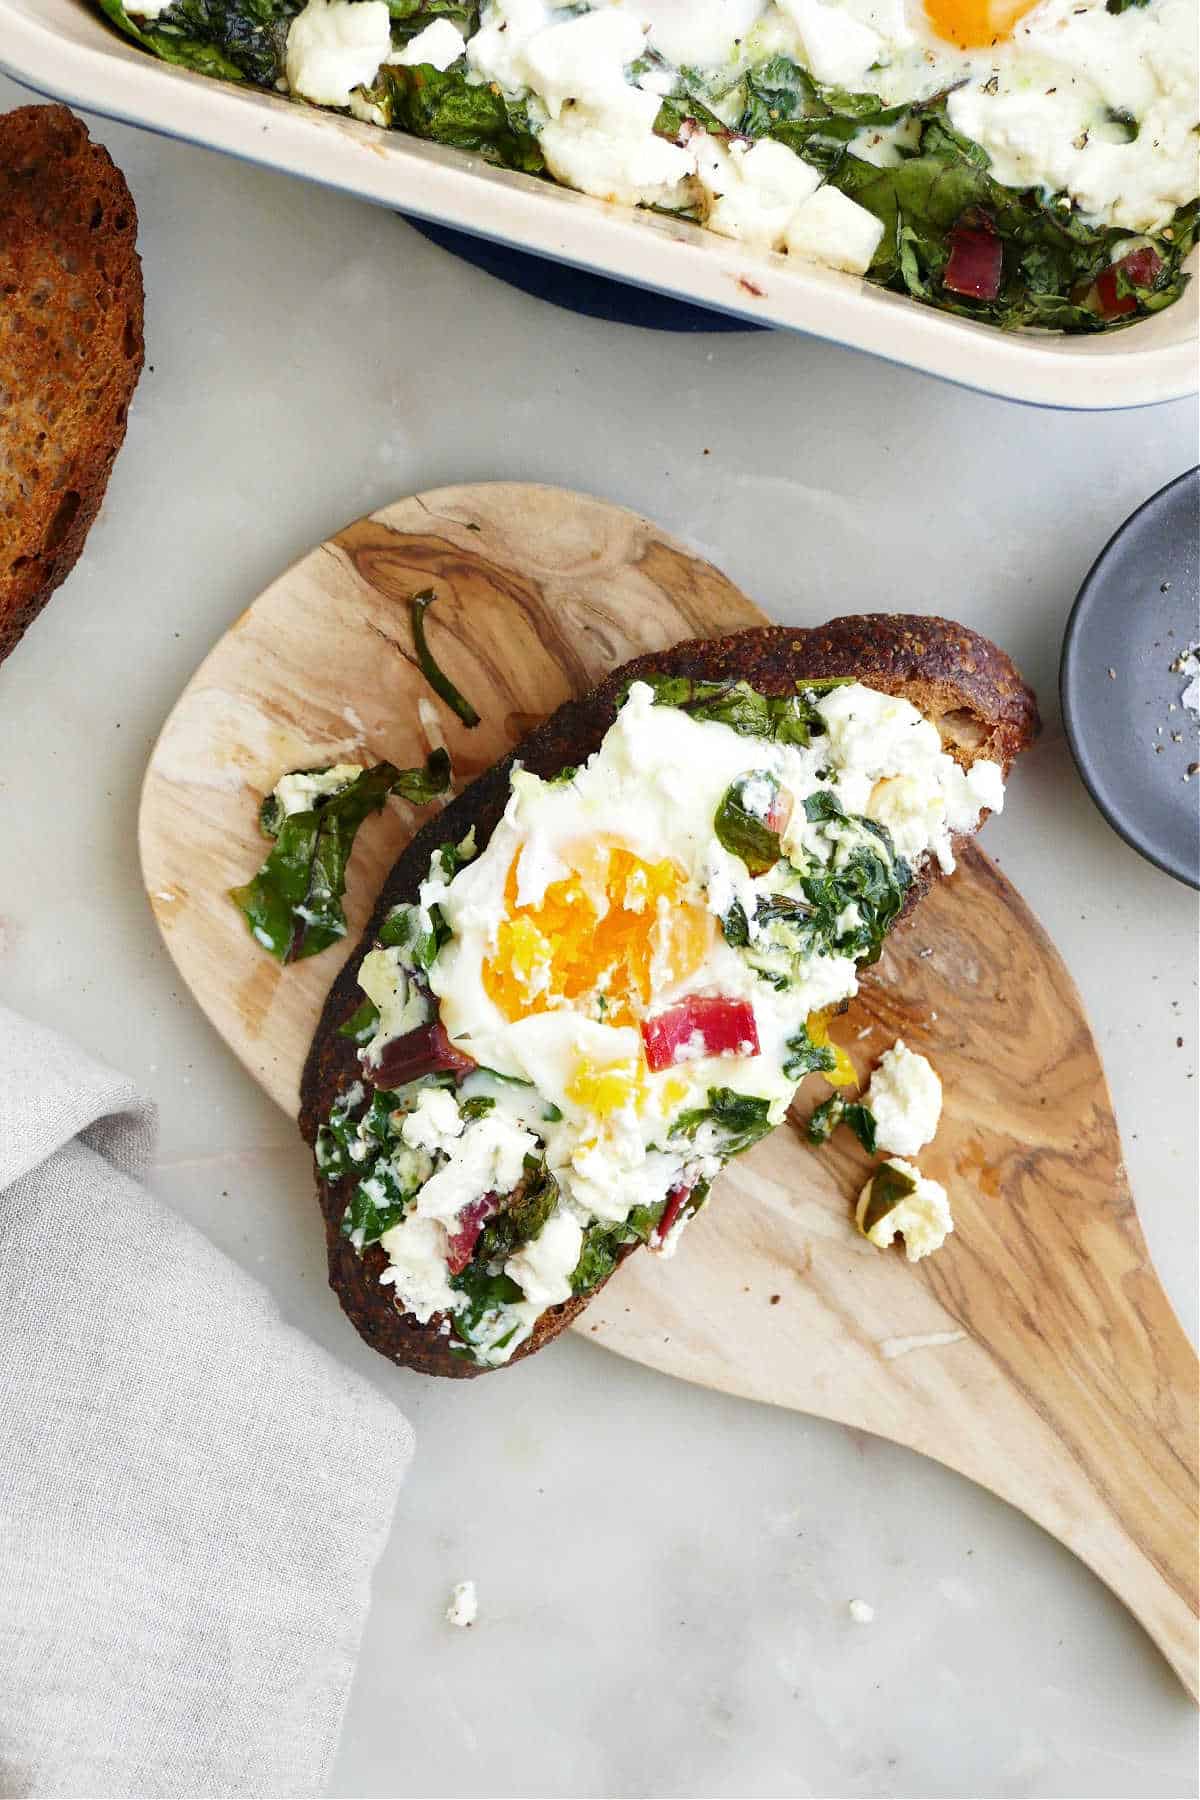 baked eggs, chard, and goat cheese on a slice of toast on a wooden board